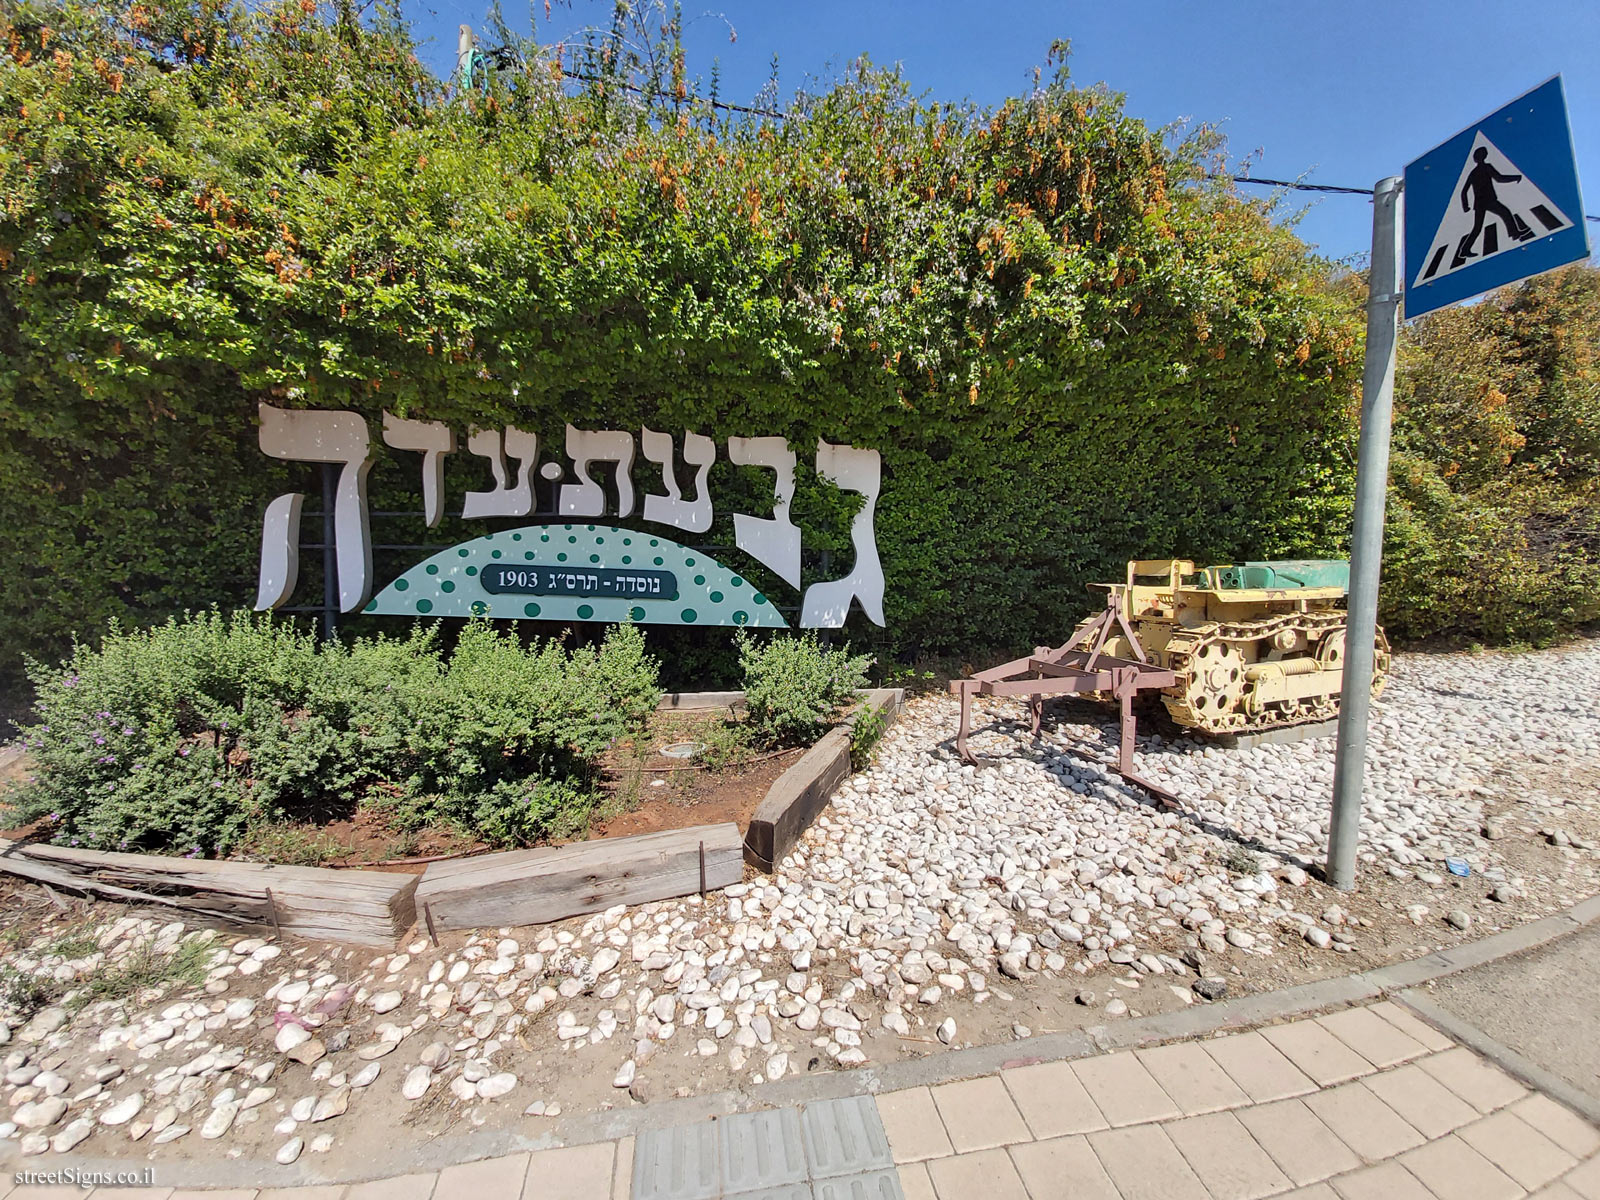 Givat Ada - The entrance sign to the community